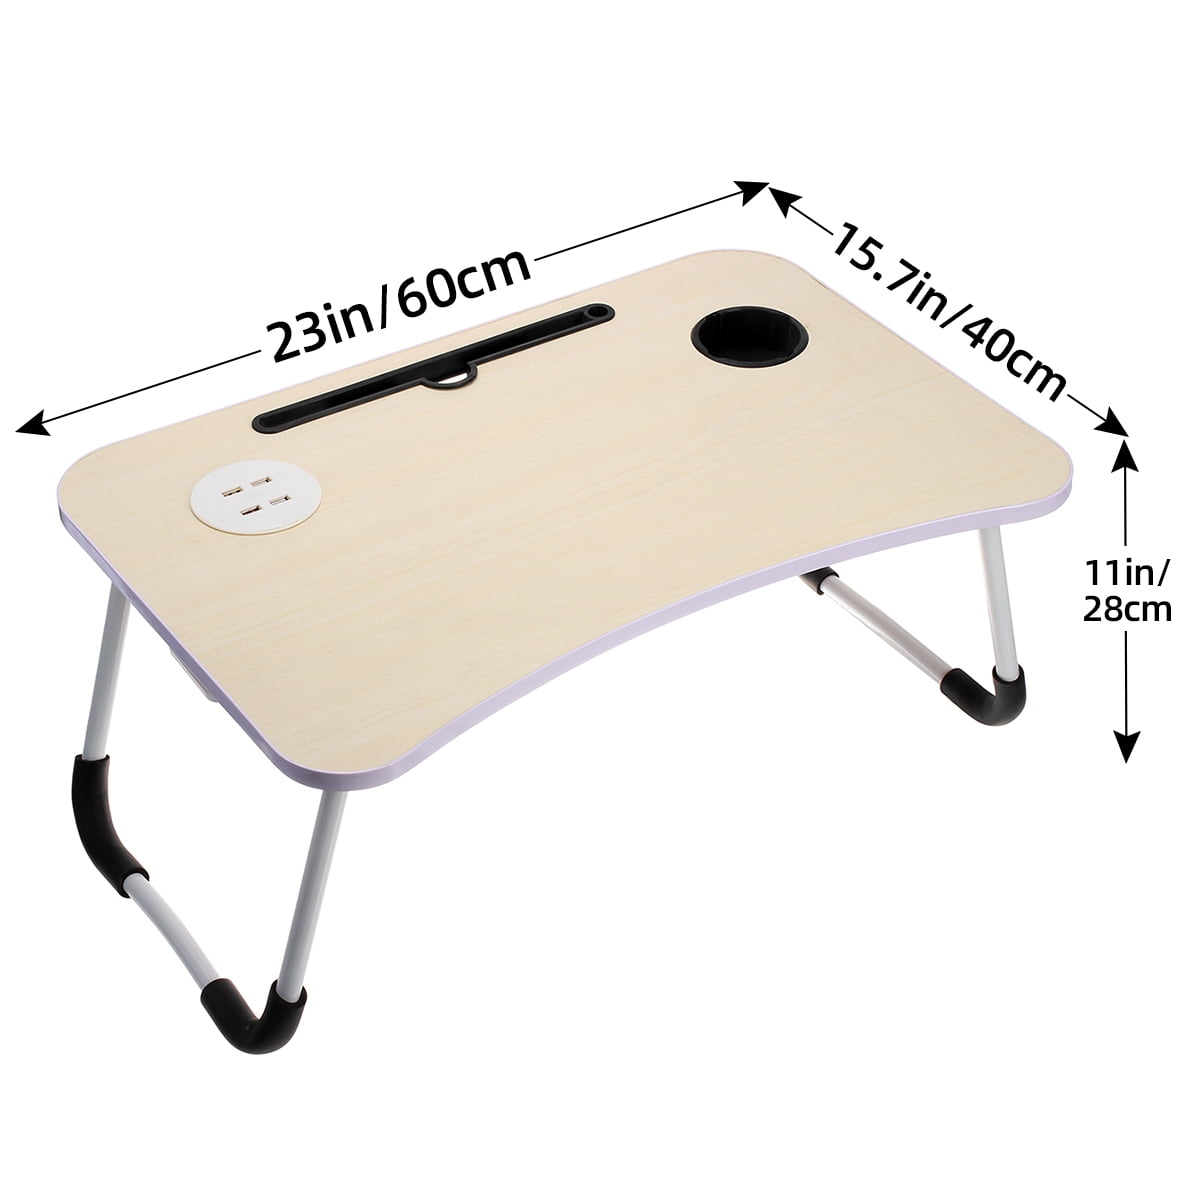  Zapuno Lap Laptop Desk for Bed, Multi-Function Laptop Bed  Table with Storage Drawer and Cup Holder, Laptop Lap Desk Laptop Stand Tray  Table Breakfast Tray for Eating, Reading and Working